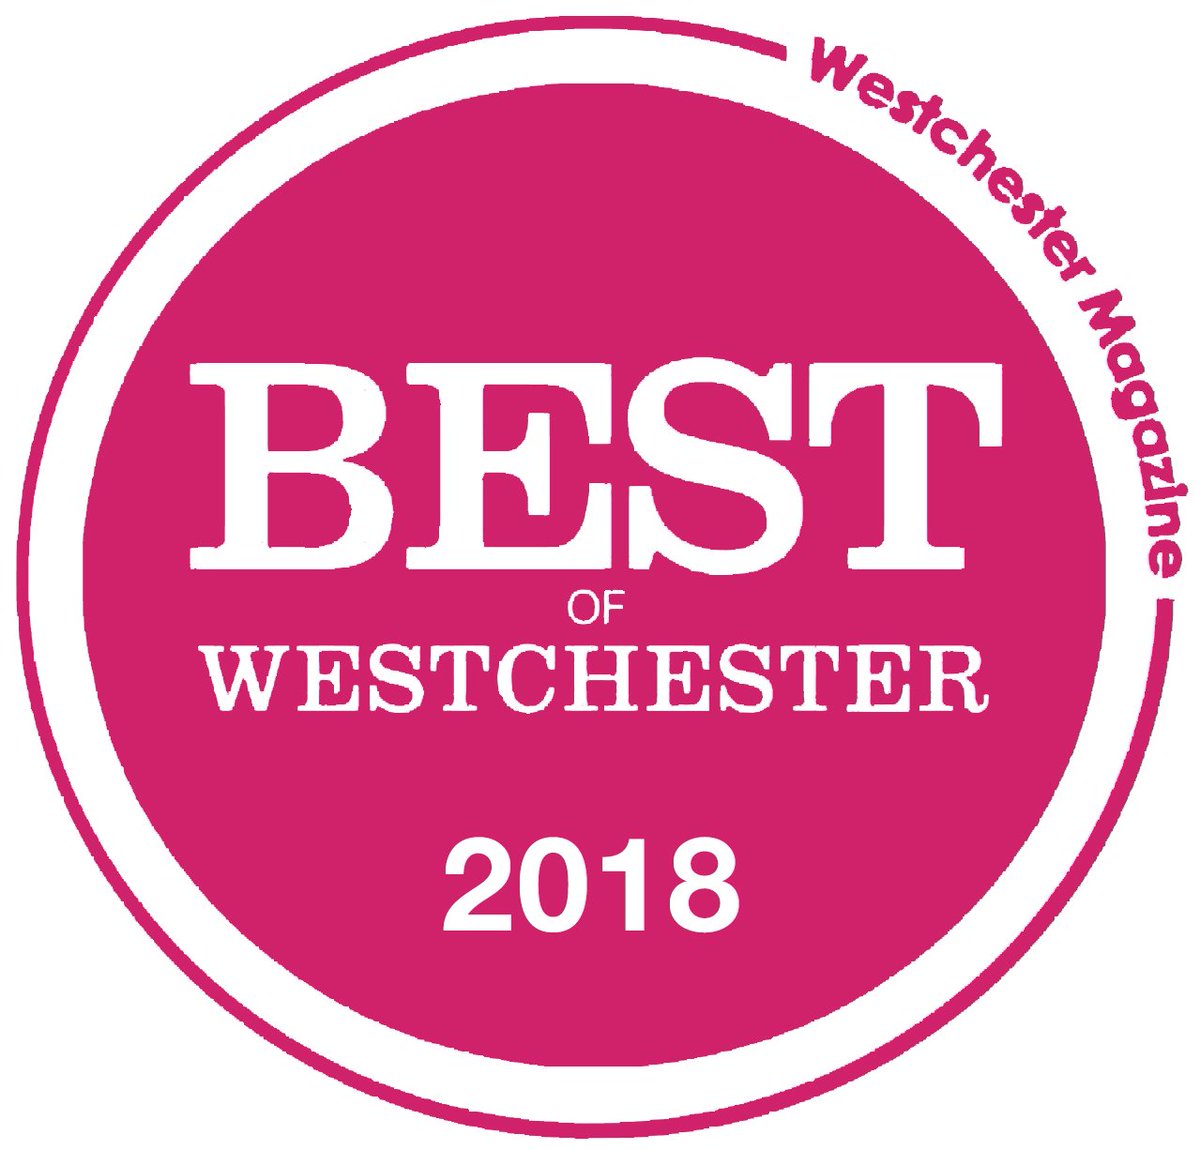 Vote for the HRM in @WestchesterMag's #BestOfWestchester poll. Deadline is TODAY, 1/24! Write us in for these #FunandLeisure categories: Historic Site, Nonprofit Event, Date Night (other than a restaurant), and Music Venue! ow.ly/lo0o30hXuRn